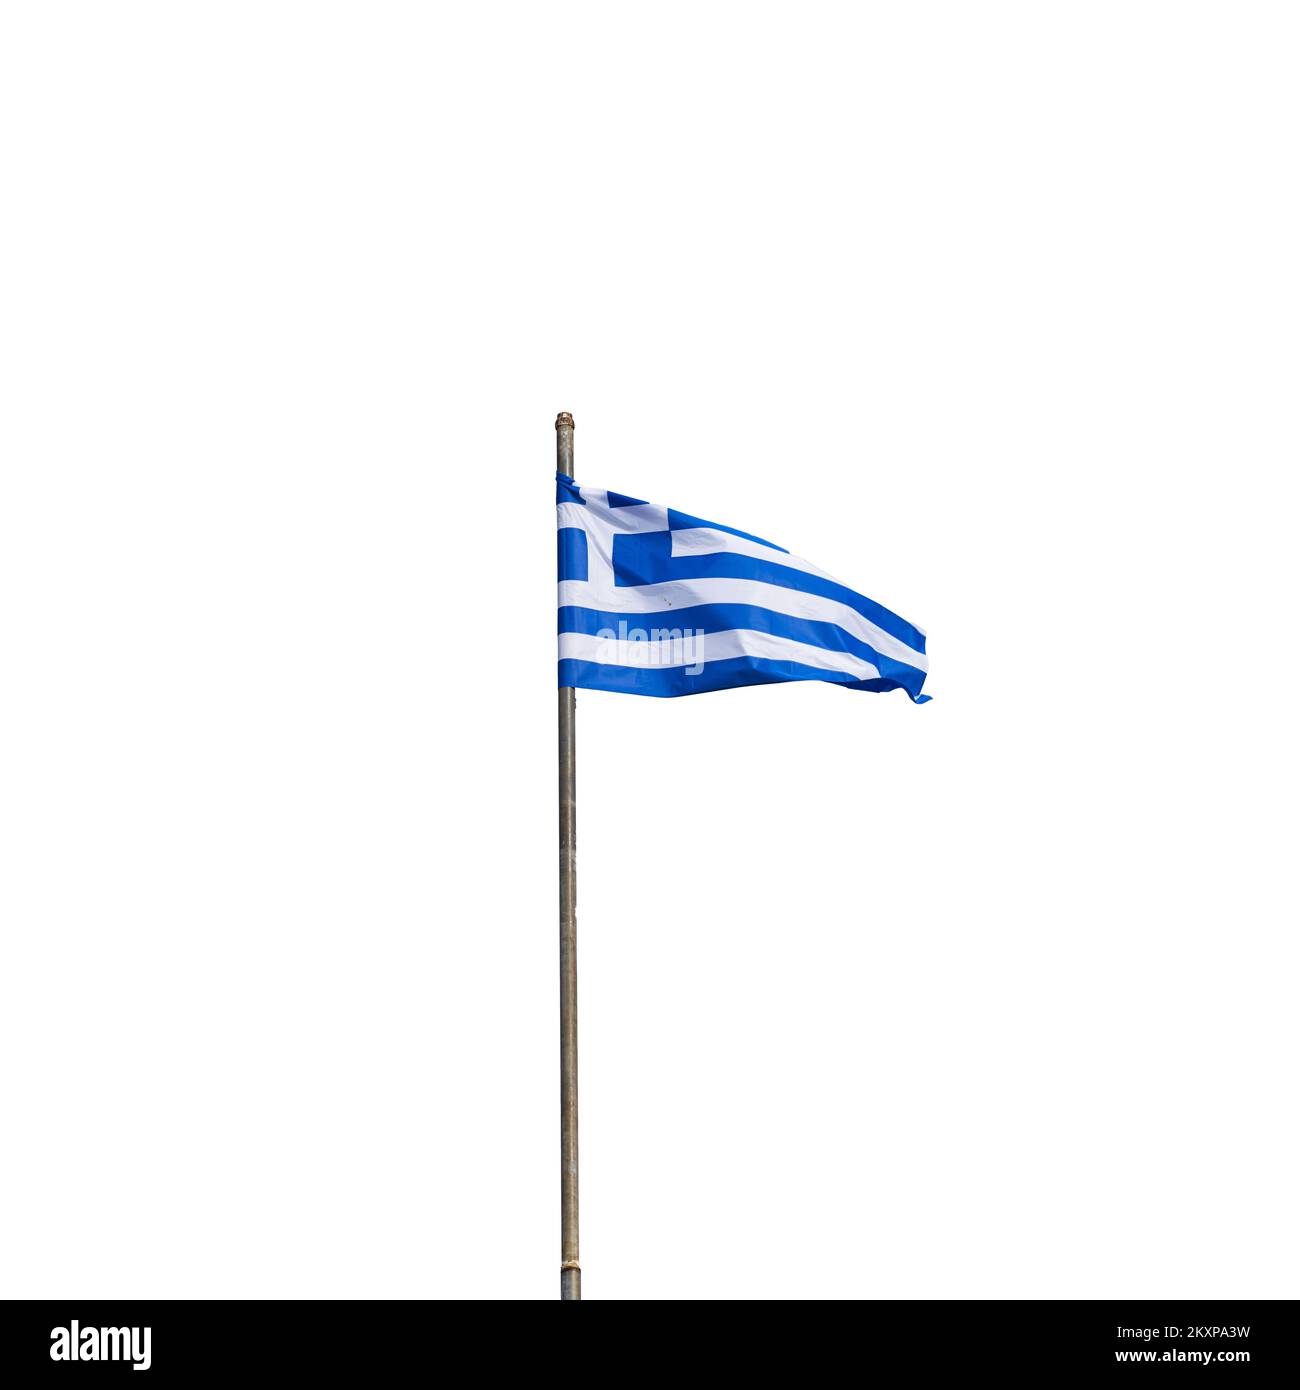 The Greek flag waving in the sky. Stock Photo